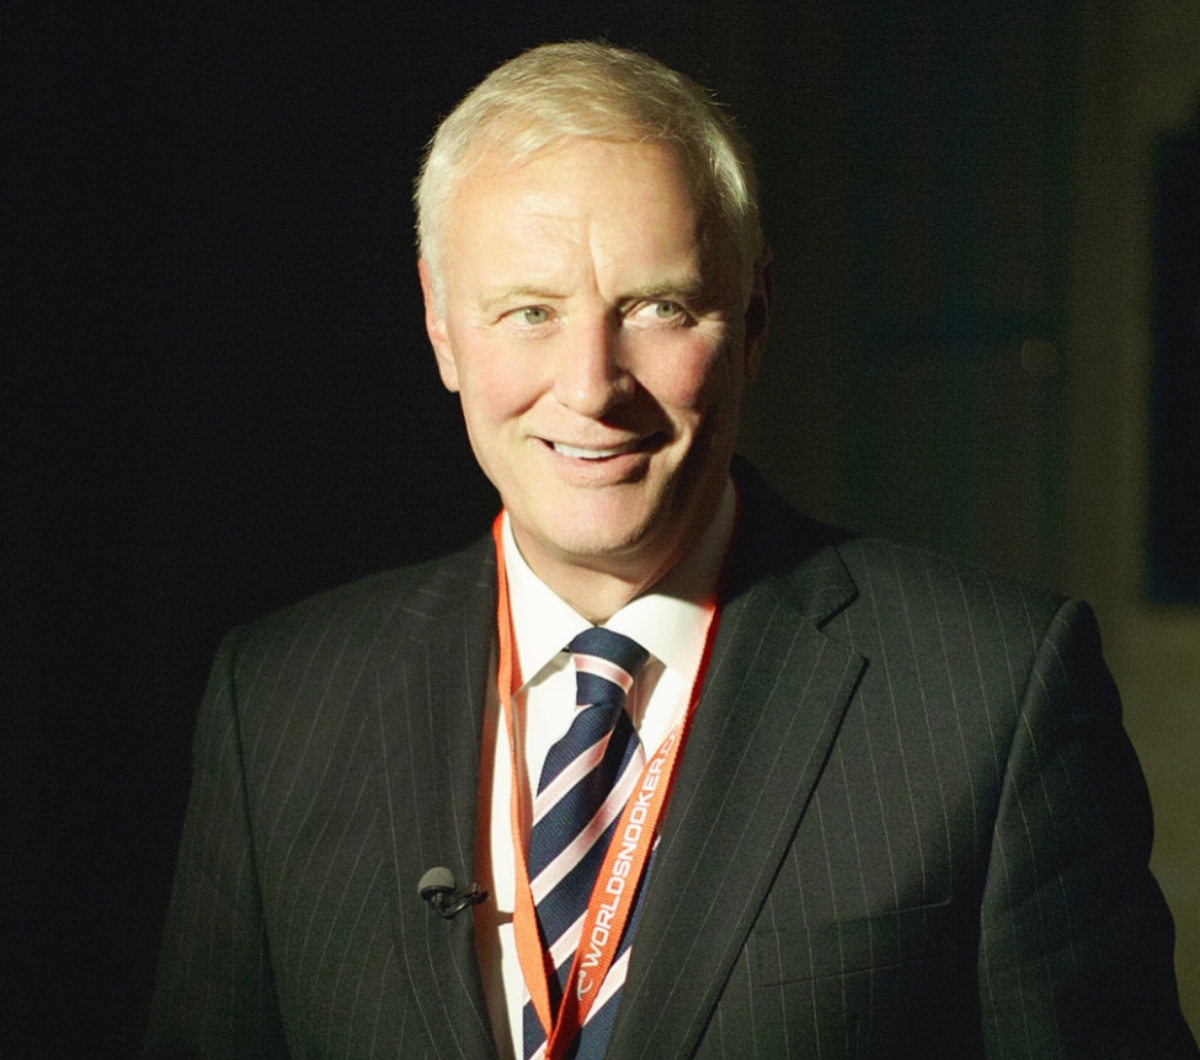 Barry Hearn became one of British sport’s most recognisable promoters